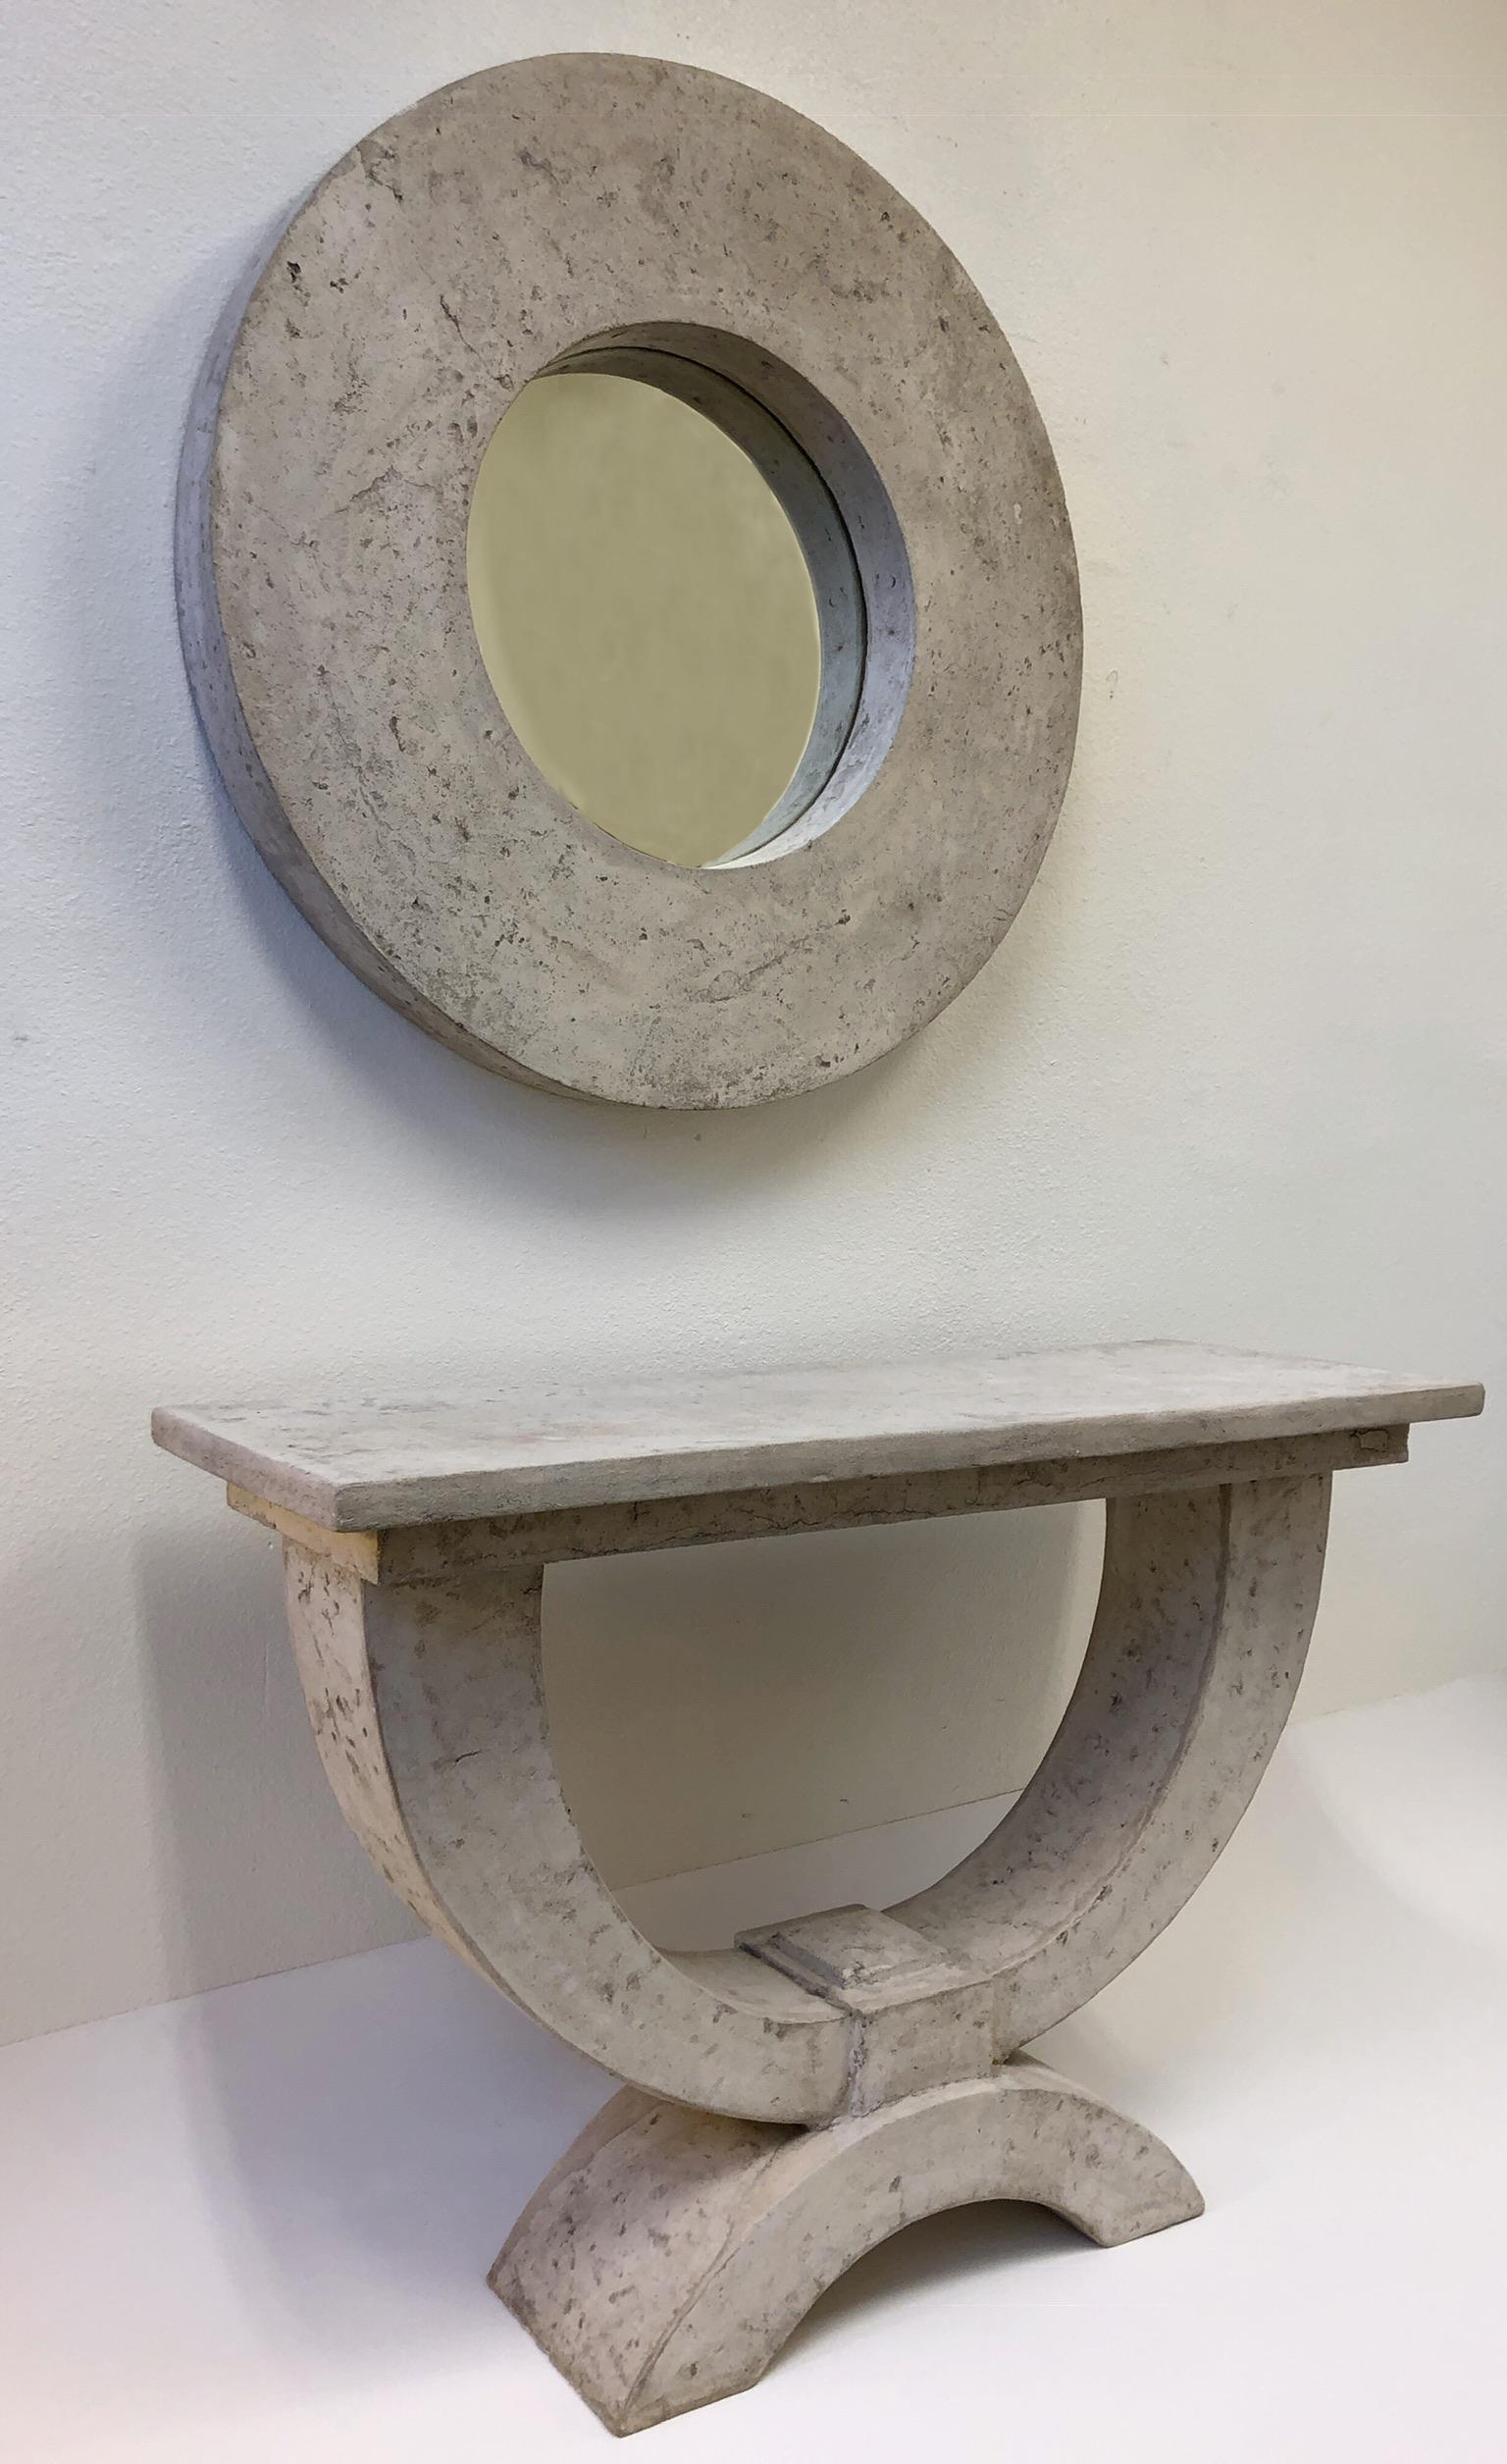 O spectacular faux stone console table and wall mirror design by Michael Taylor. The table and mirror are constructed of fiberglass made to look like stone. This can be used indoors or outdoors. 
Dim:
Mirror- 39.5” diameter 4.25” deep.
Table-